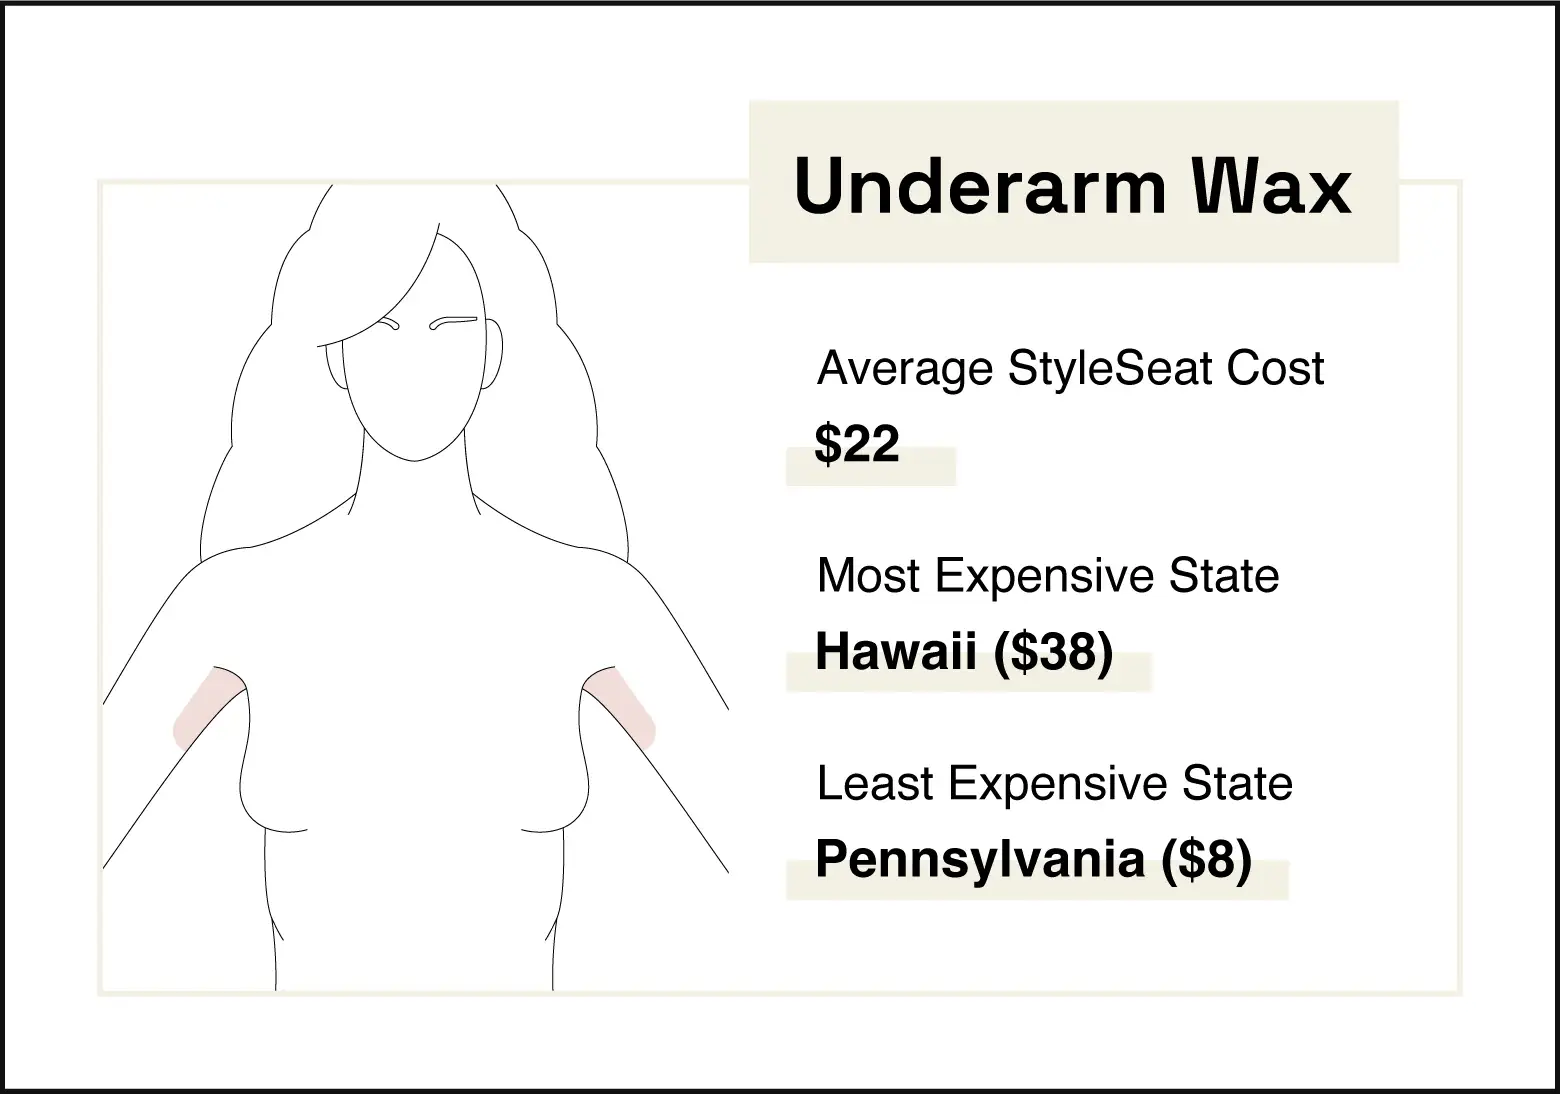 Image shows area where an underarm wax occurs. The average underarm wax on StyleSeat costs $22.